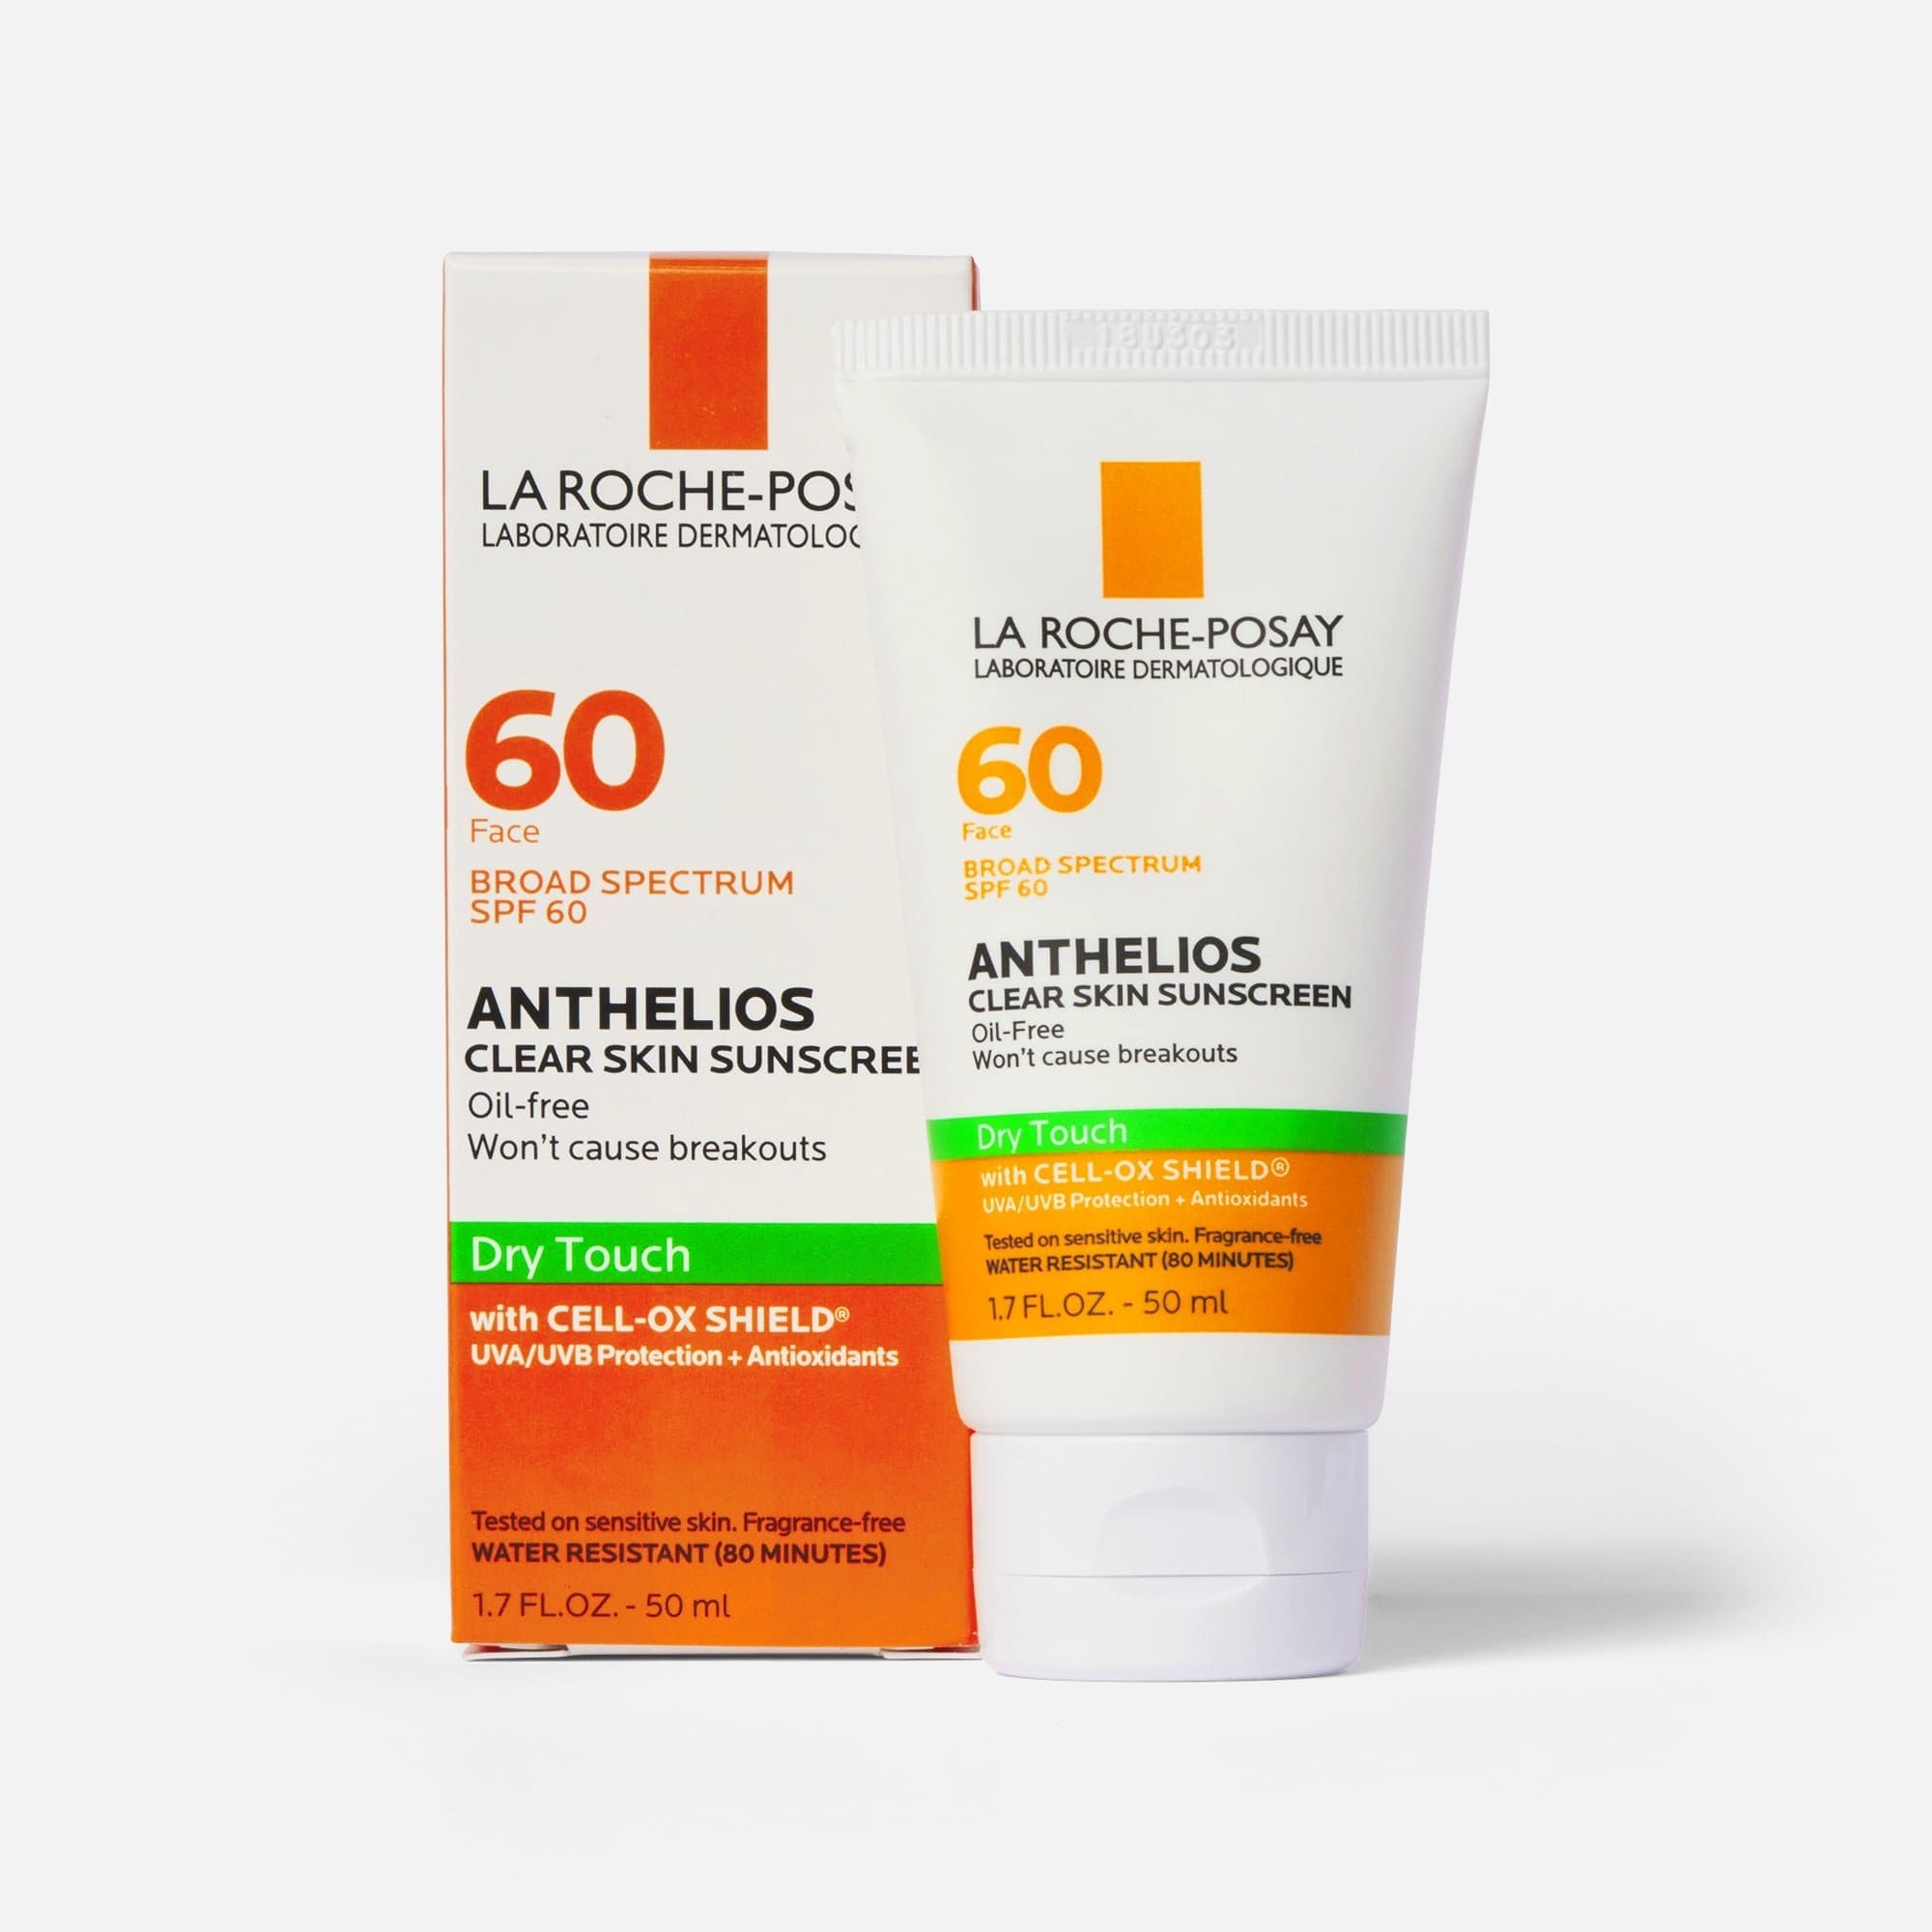 9051 La Roche-Posay Anthelios Clear Skin, Dry Touch Face Sunscreen, Oil Free with SPF 60 50 ml